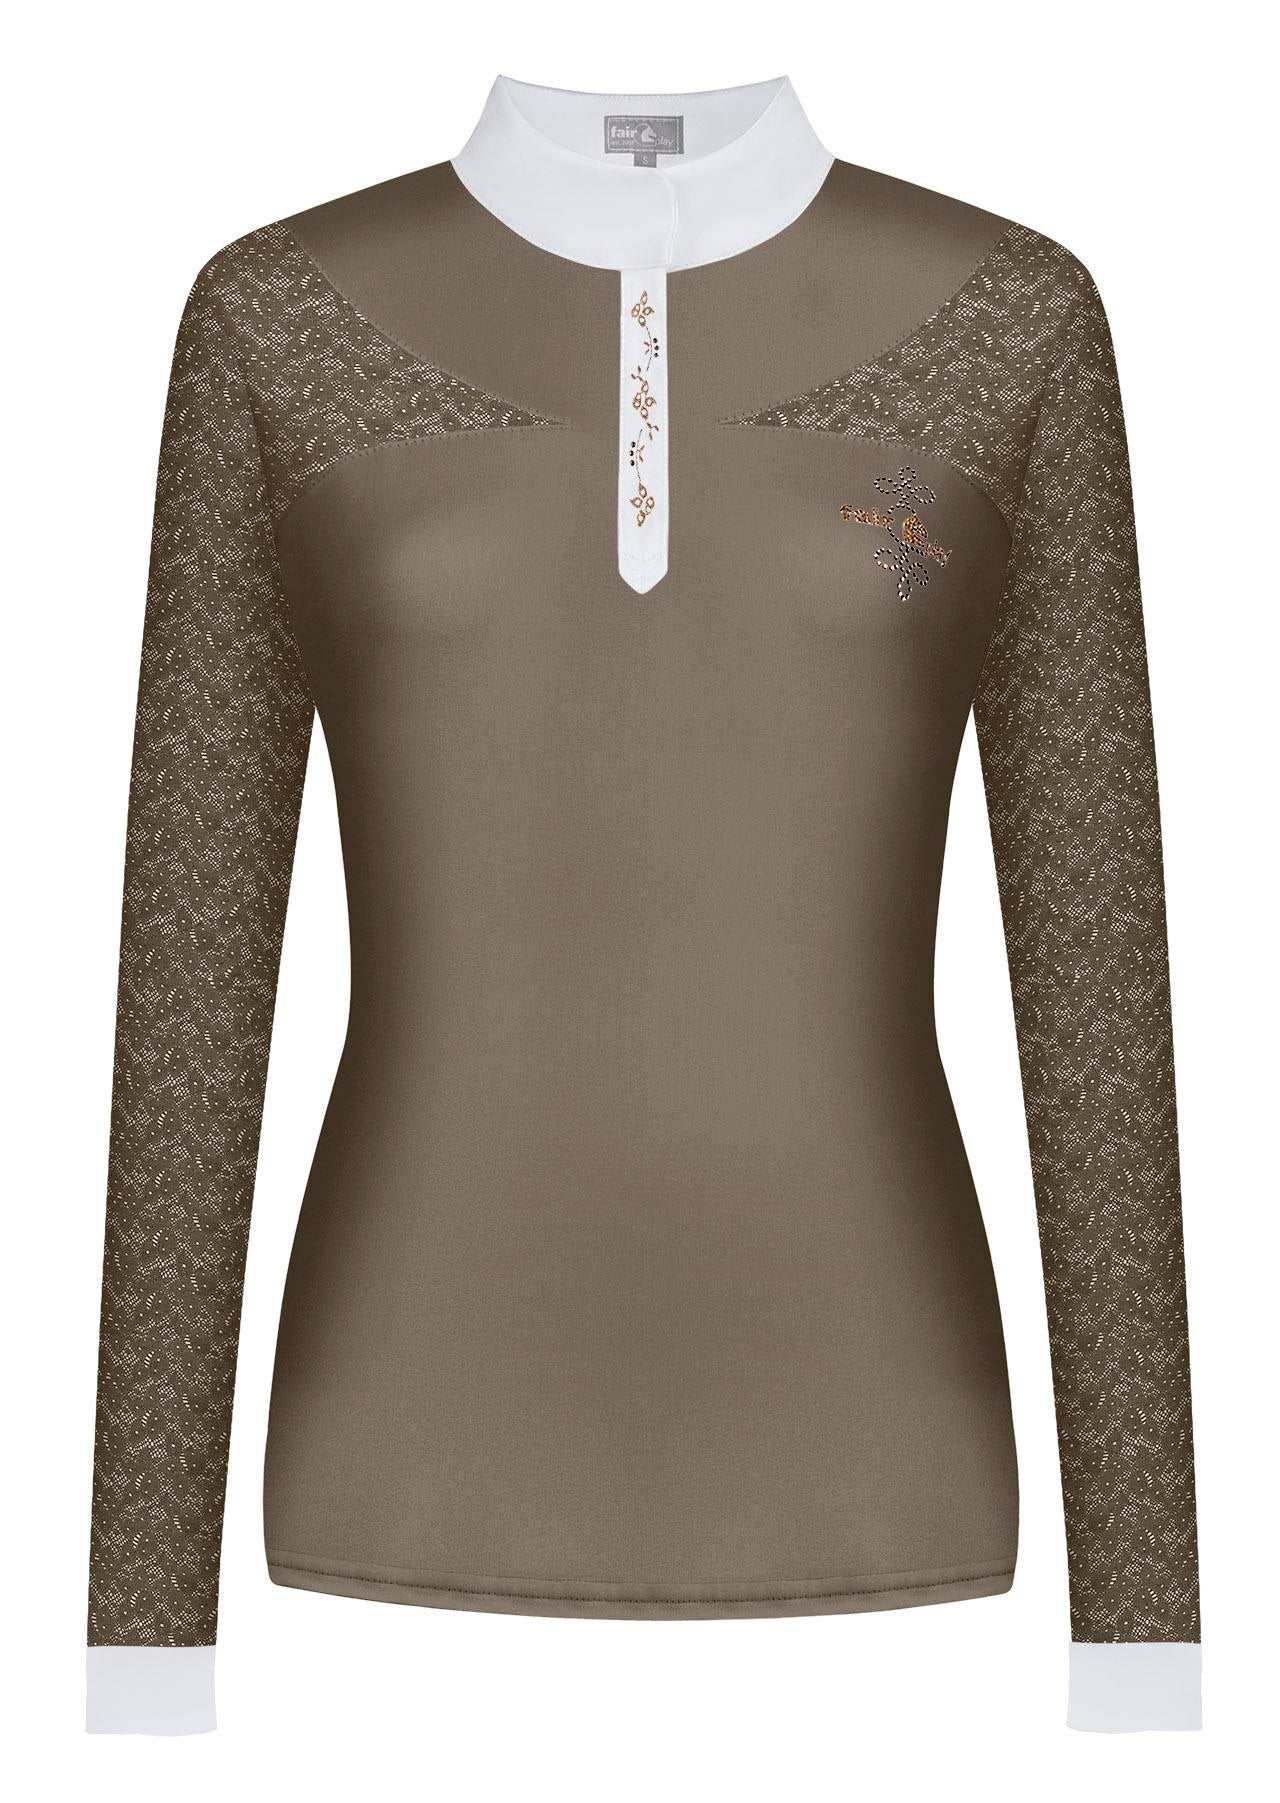 Alexis long sleeve Rosegold FairPlay competition shirt